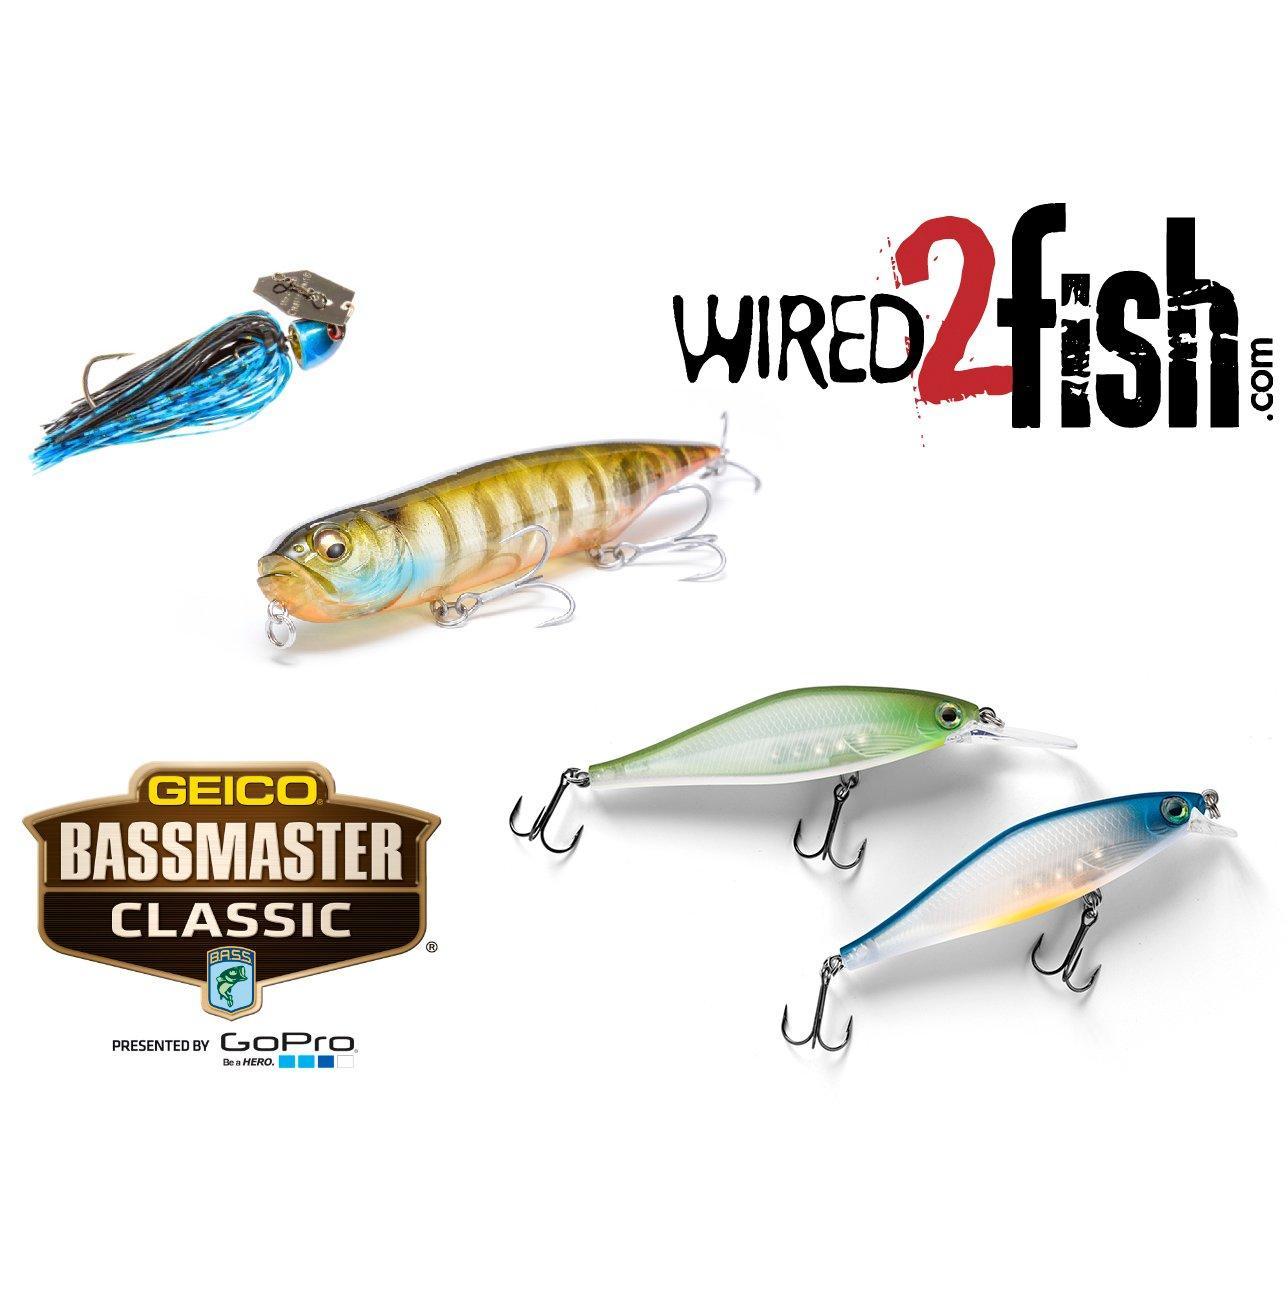 2016 New Tackle Releases for BASS Classic - Wired2Fish